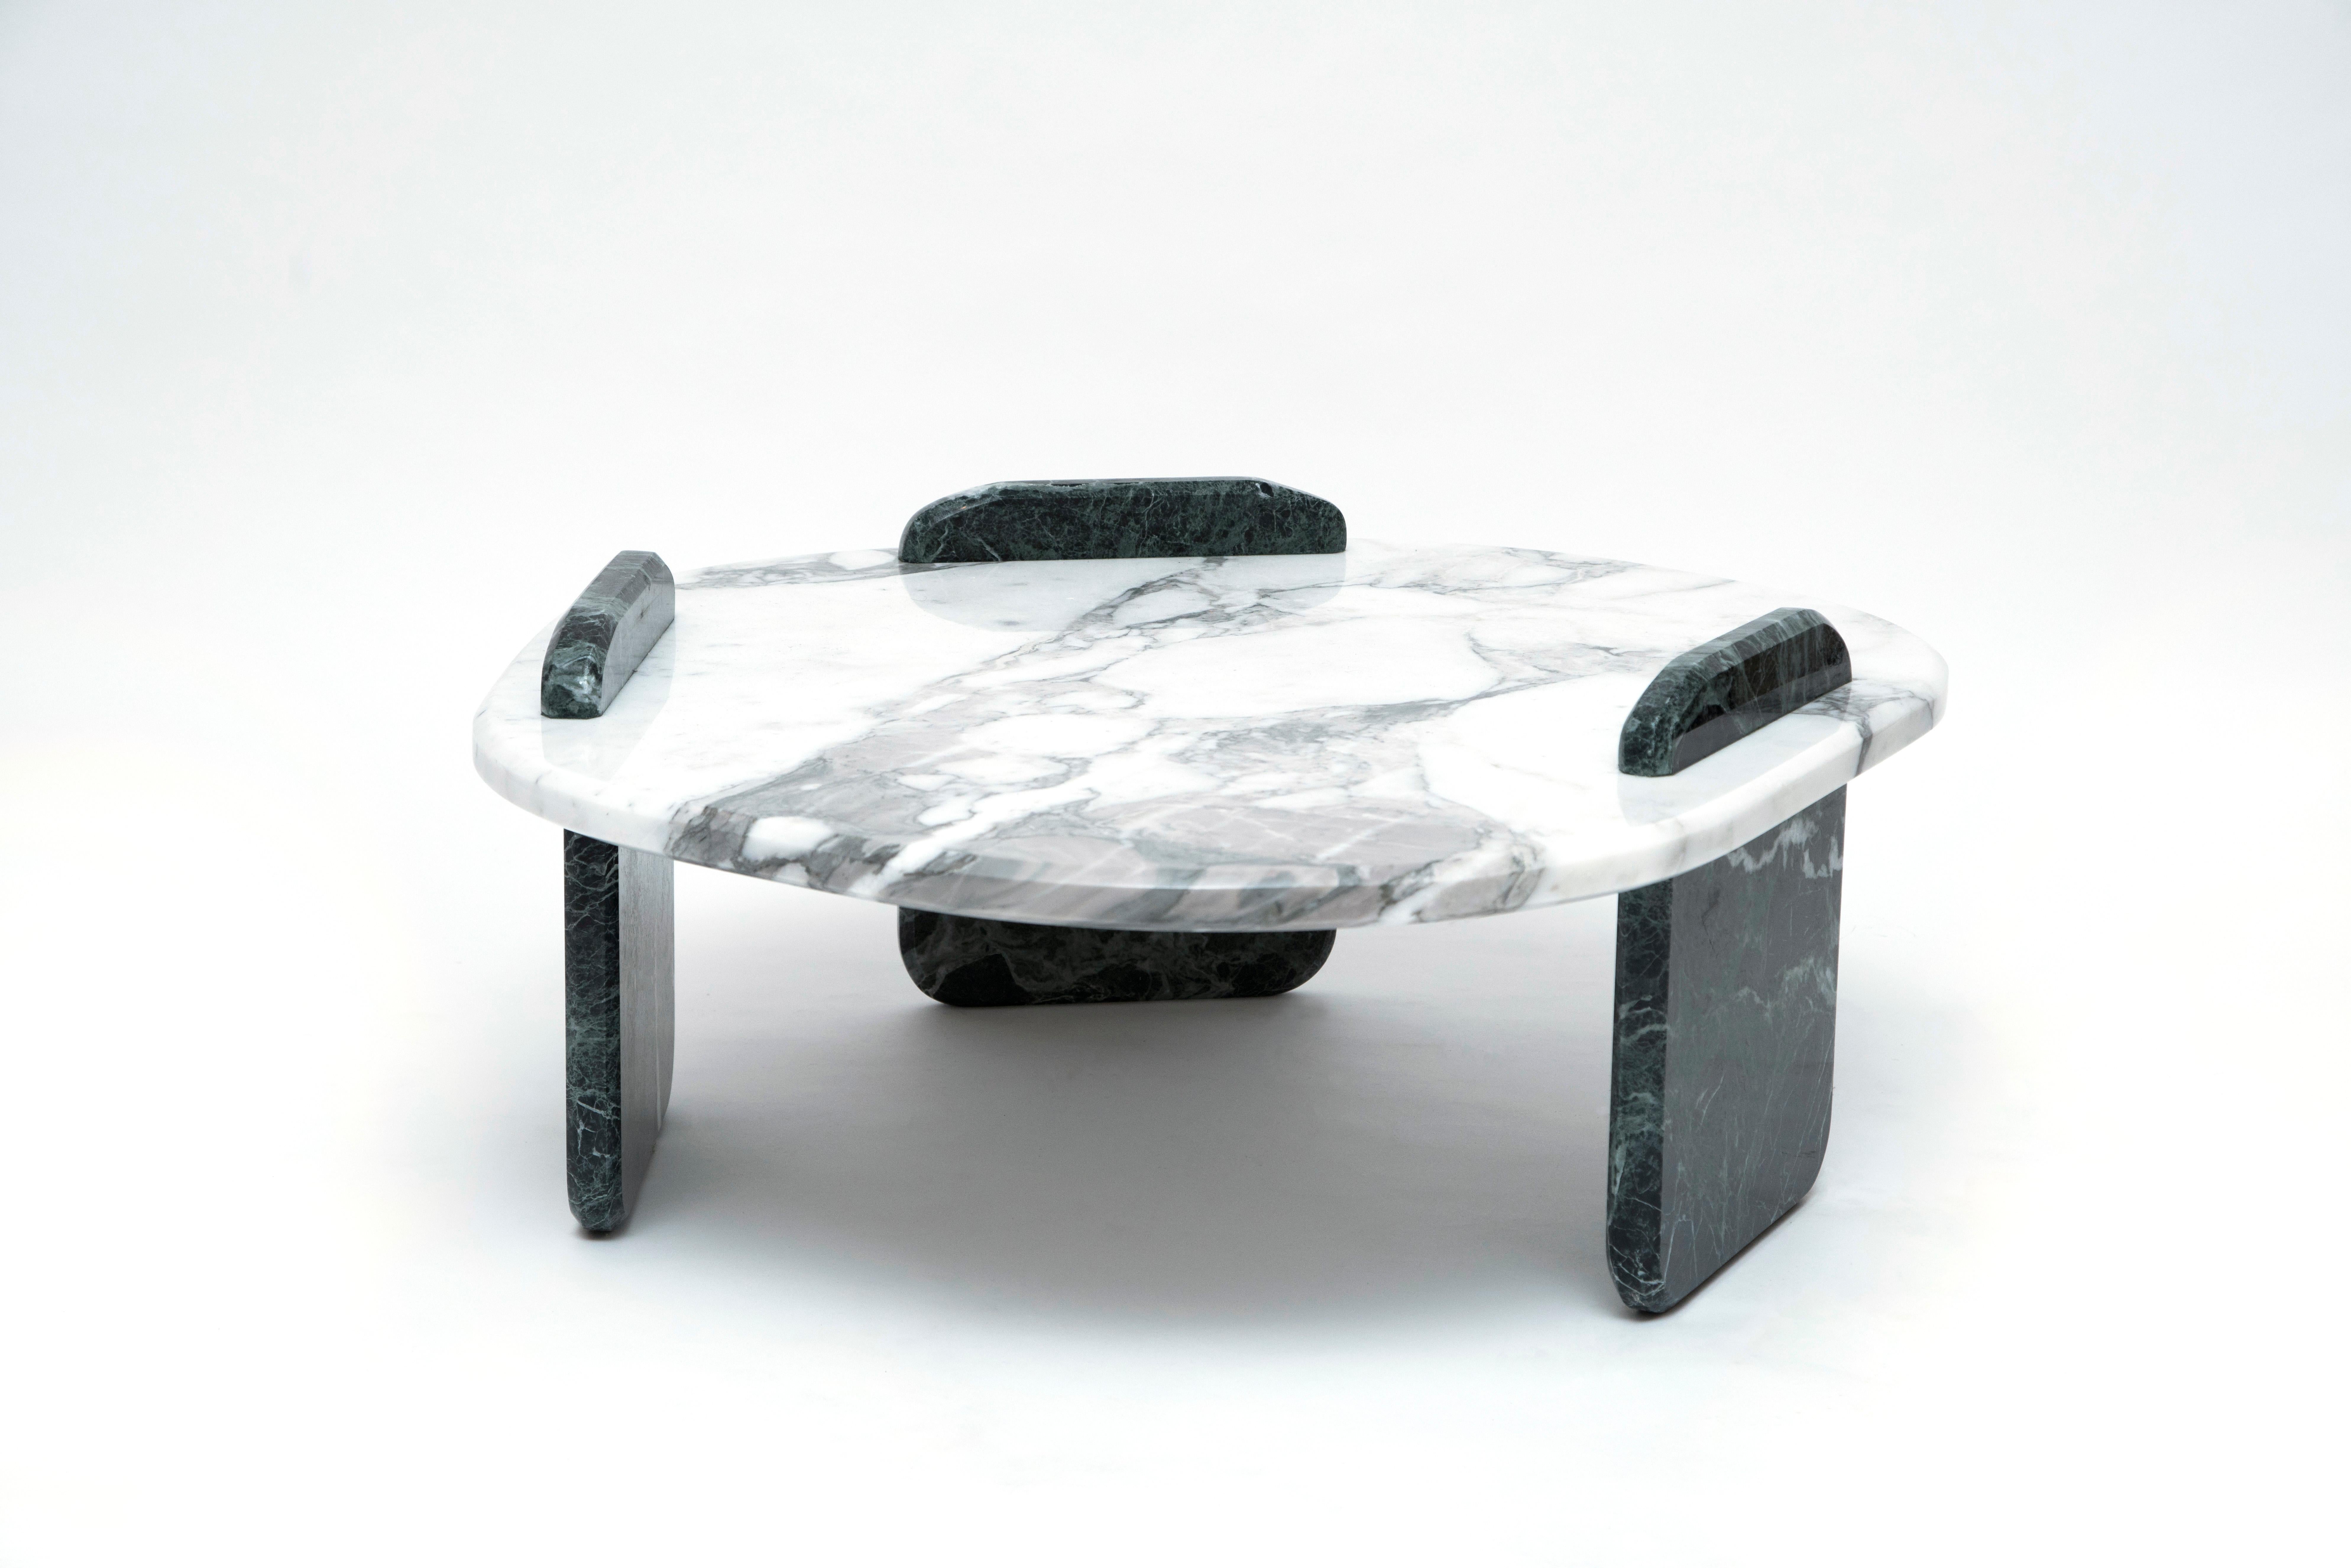 M-Table by Thomas Trad
2018
Dimensions: L 90 x W 80 x H 30 cm
Materials: Arabescato marble top, Tinos green legs

Marble coffee table.

Thomas Trad is a product designer from Beirut. An alumnus of London's prestigious Central Saint Martins,